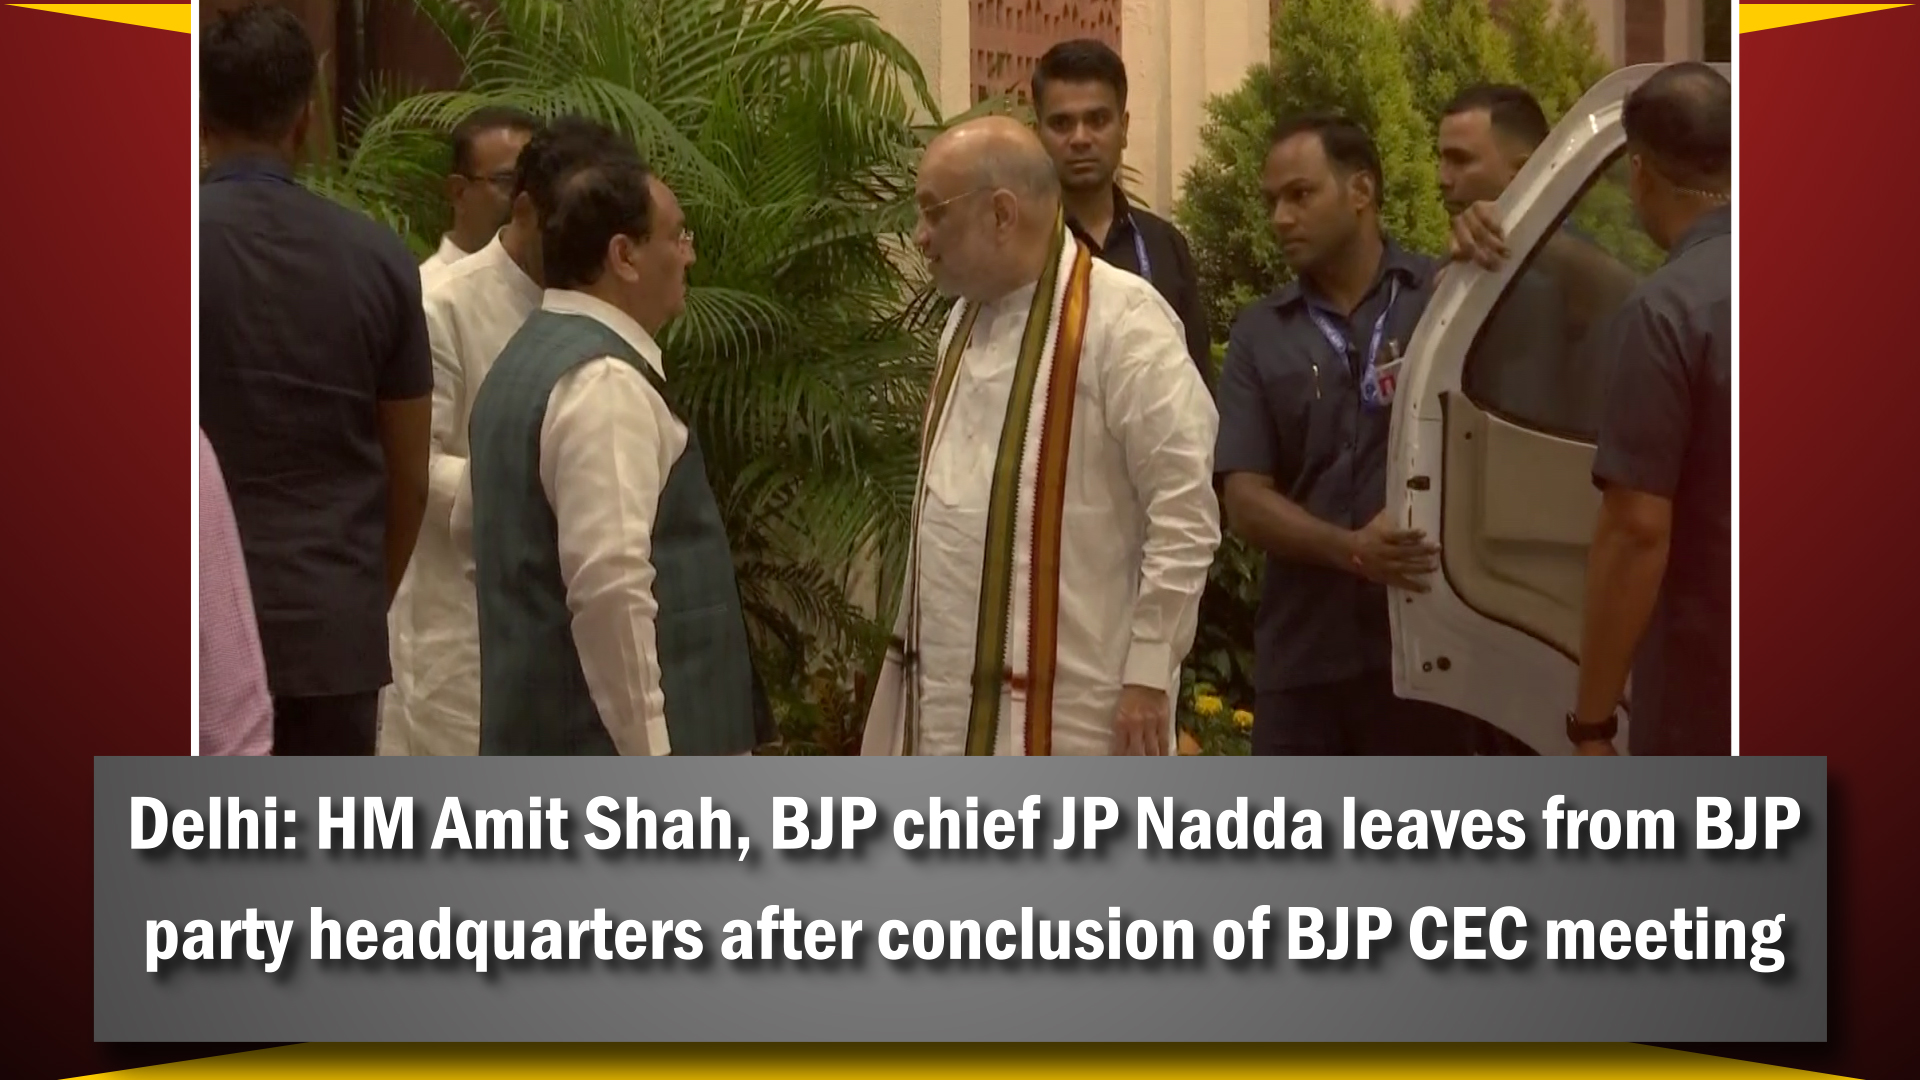 Delhi: HM Amit Shah, BJP chief JP Nadda leaves from BJP party headquarters after conclusion of BJP CEC meeting